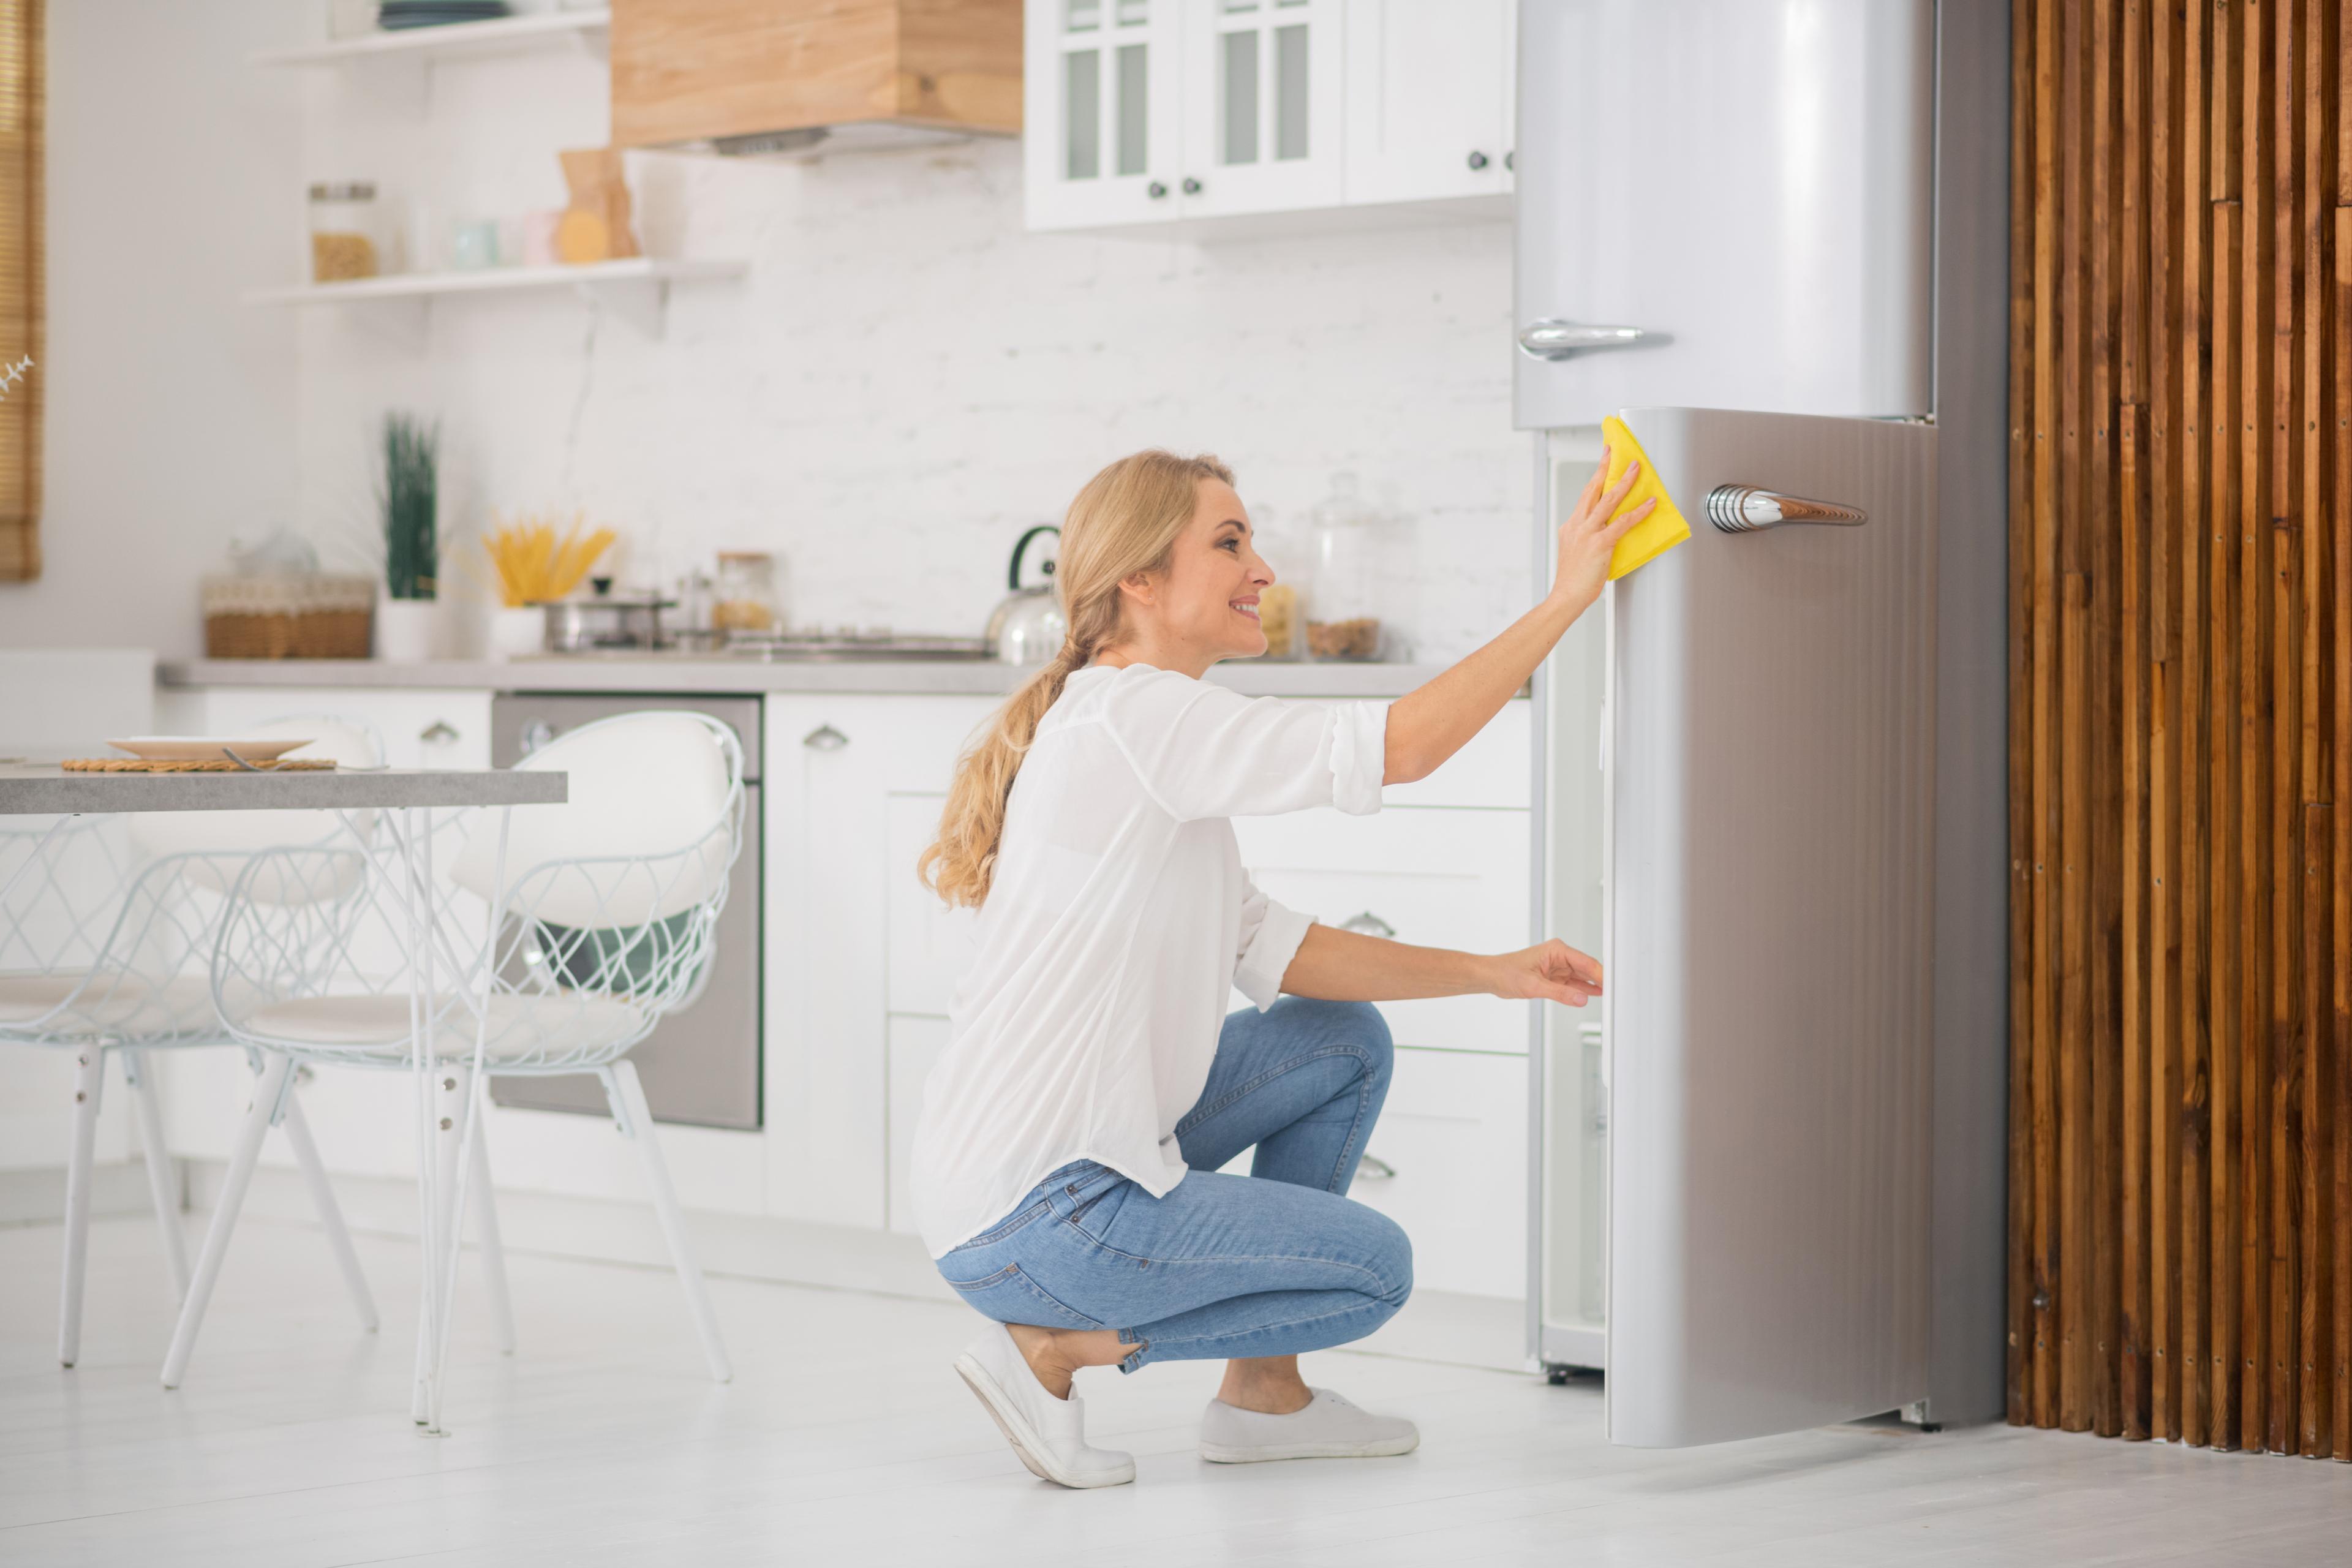 In an airy, sunlit space, someone embraces spring cleaning, gently wiping the exterior of their refrigerator, enhancing the bright atmosphere.